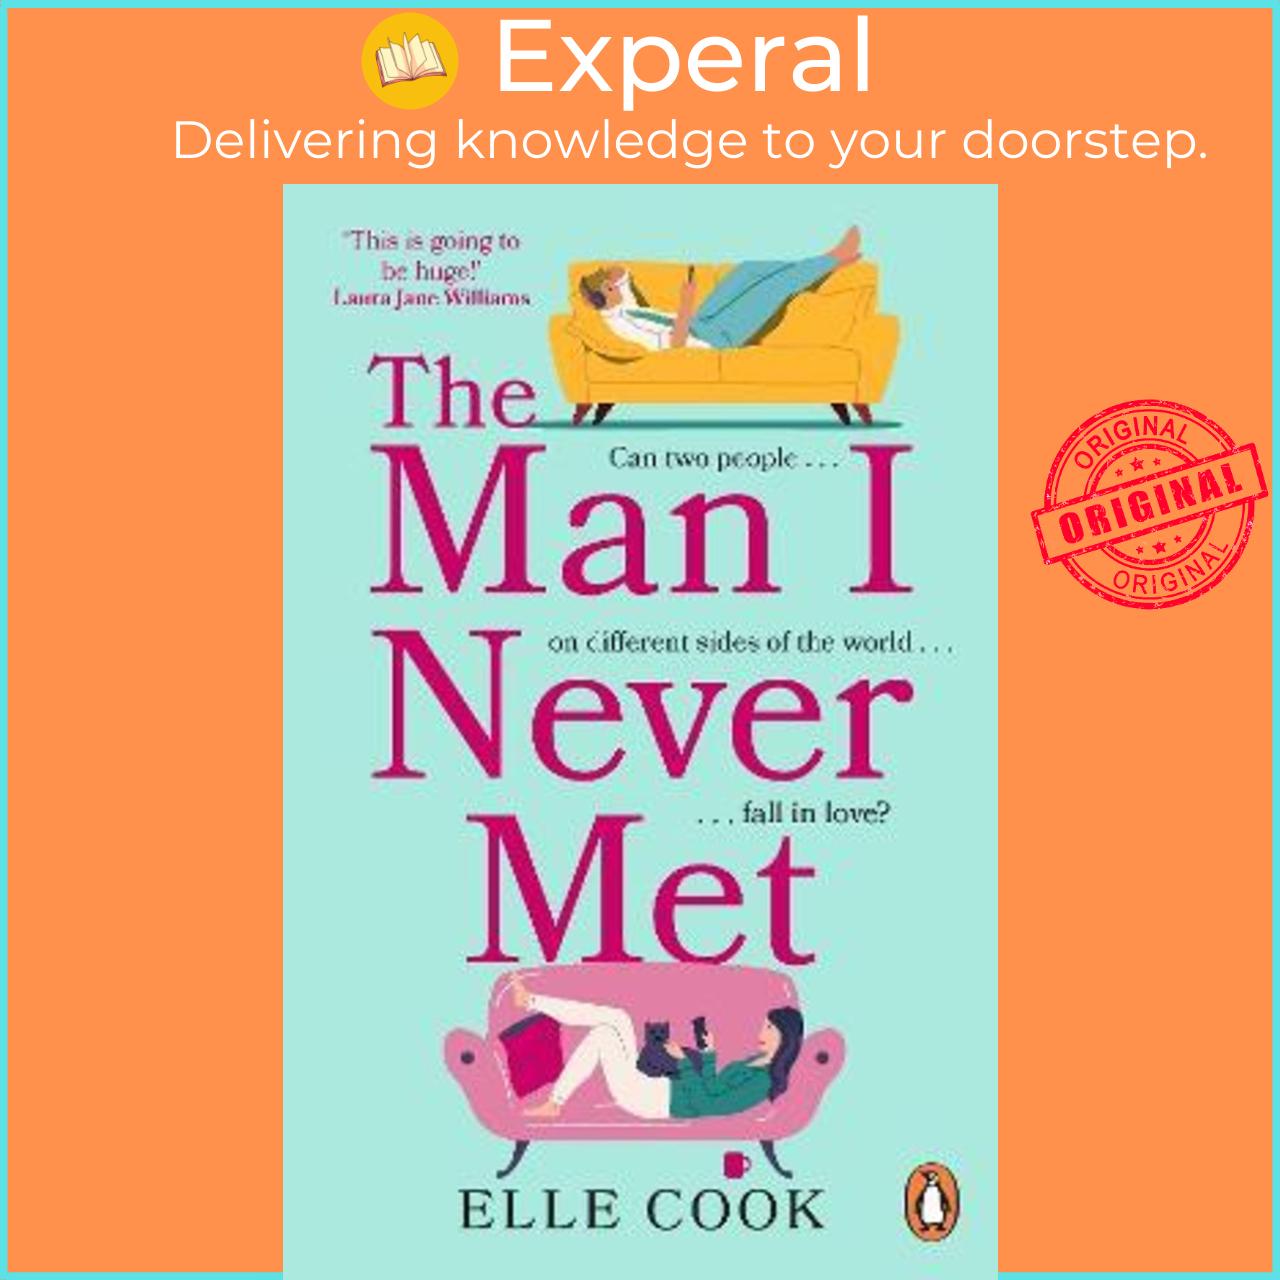 Sách - The Man I Never Met : The perfect romance to curl up wit by Elle Cook (f.s.o. Lorna Cook) (UK edition, paperback)